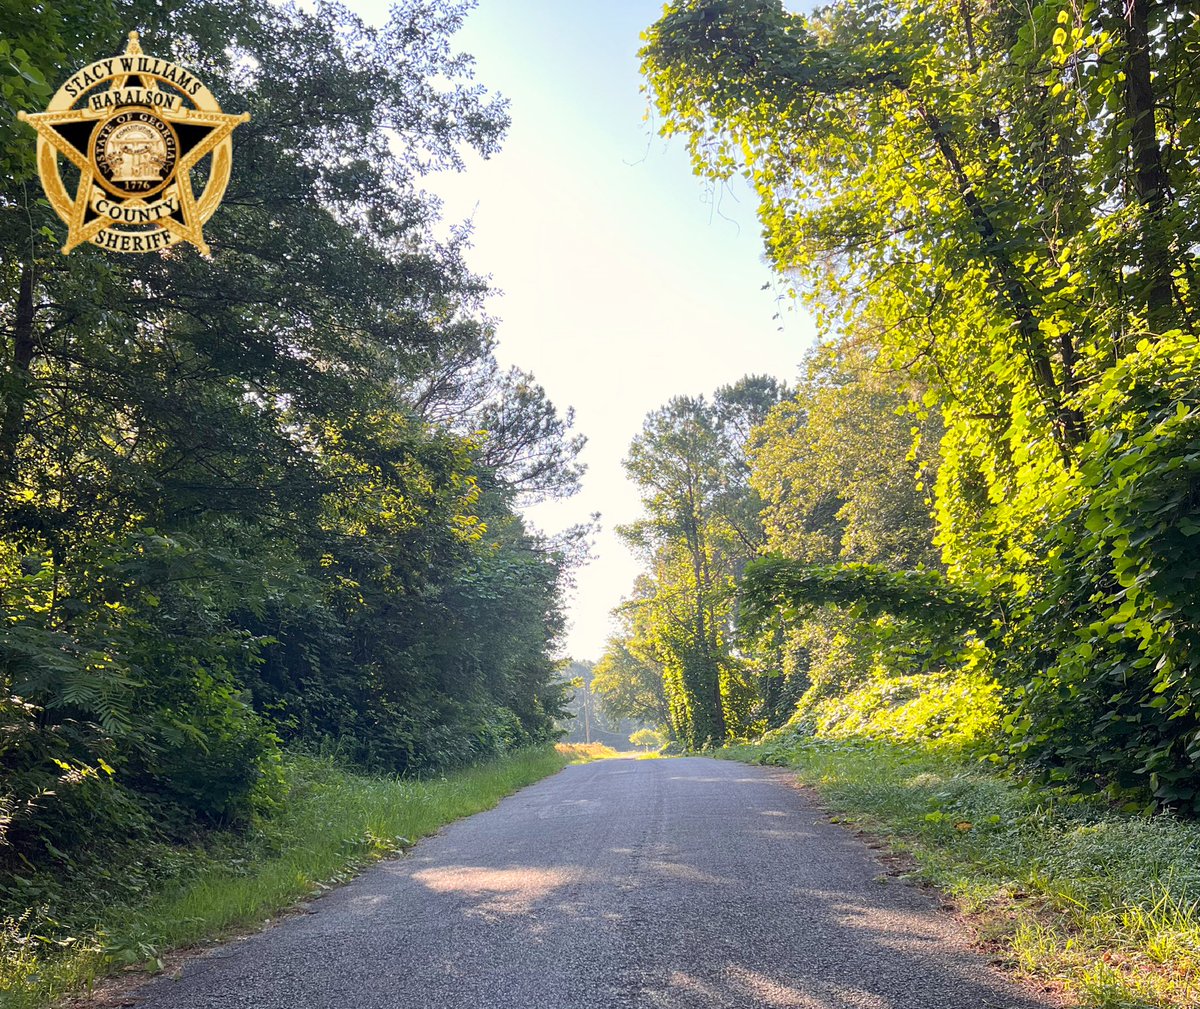 Good Tuesday Mornin’ folks, we hope y’all have a terrific day!

“A dead end is just a good place to turn around.” - Naomi Judd

#HaralsonMornings 
#TuesdayThoughts 
#CallUsIfYouNeedUs https://t.co/ma8042xMEX